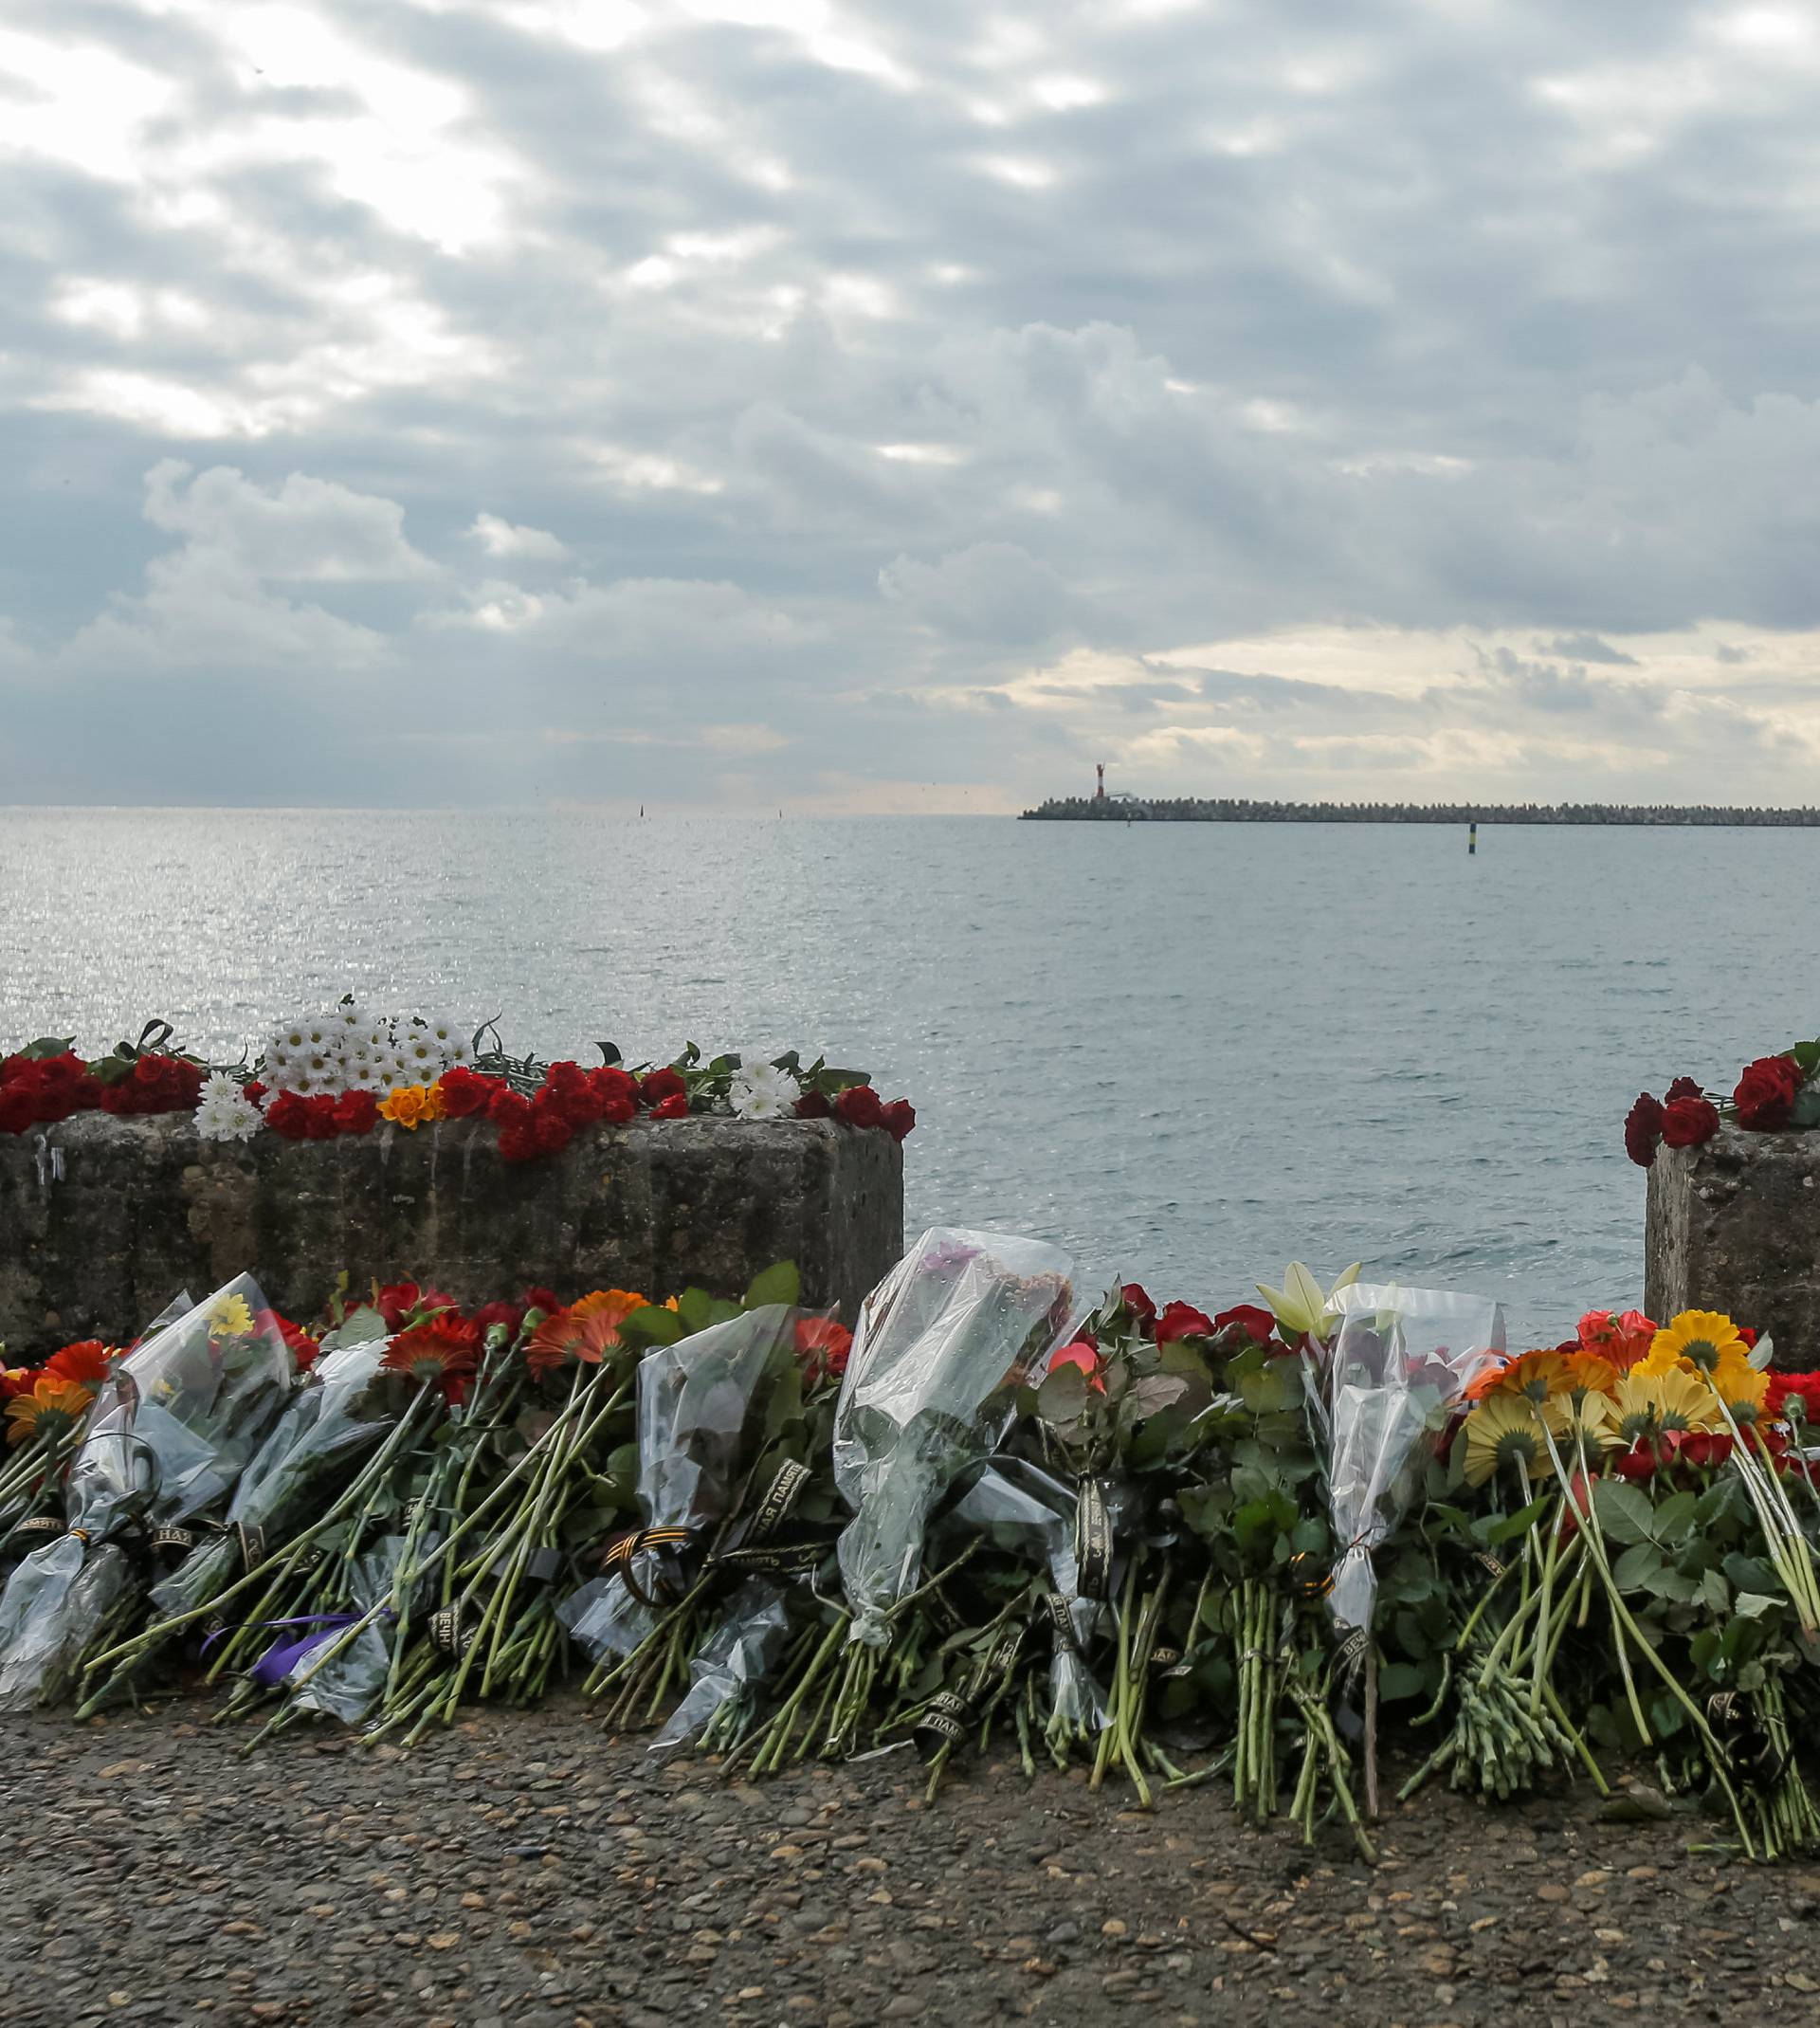 Flowers in memory of passengers and crew members of Russian military Tu-154, which crashed into the Black Sea on its way to Syria on Sunday, are placed at an embankment in the Black Sea resort city of Sochi